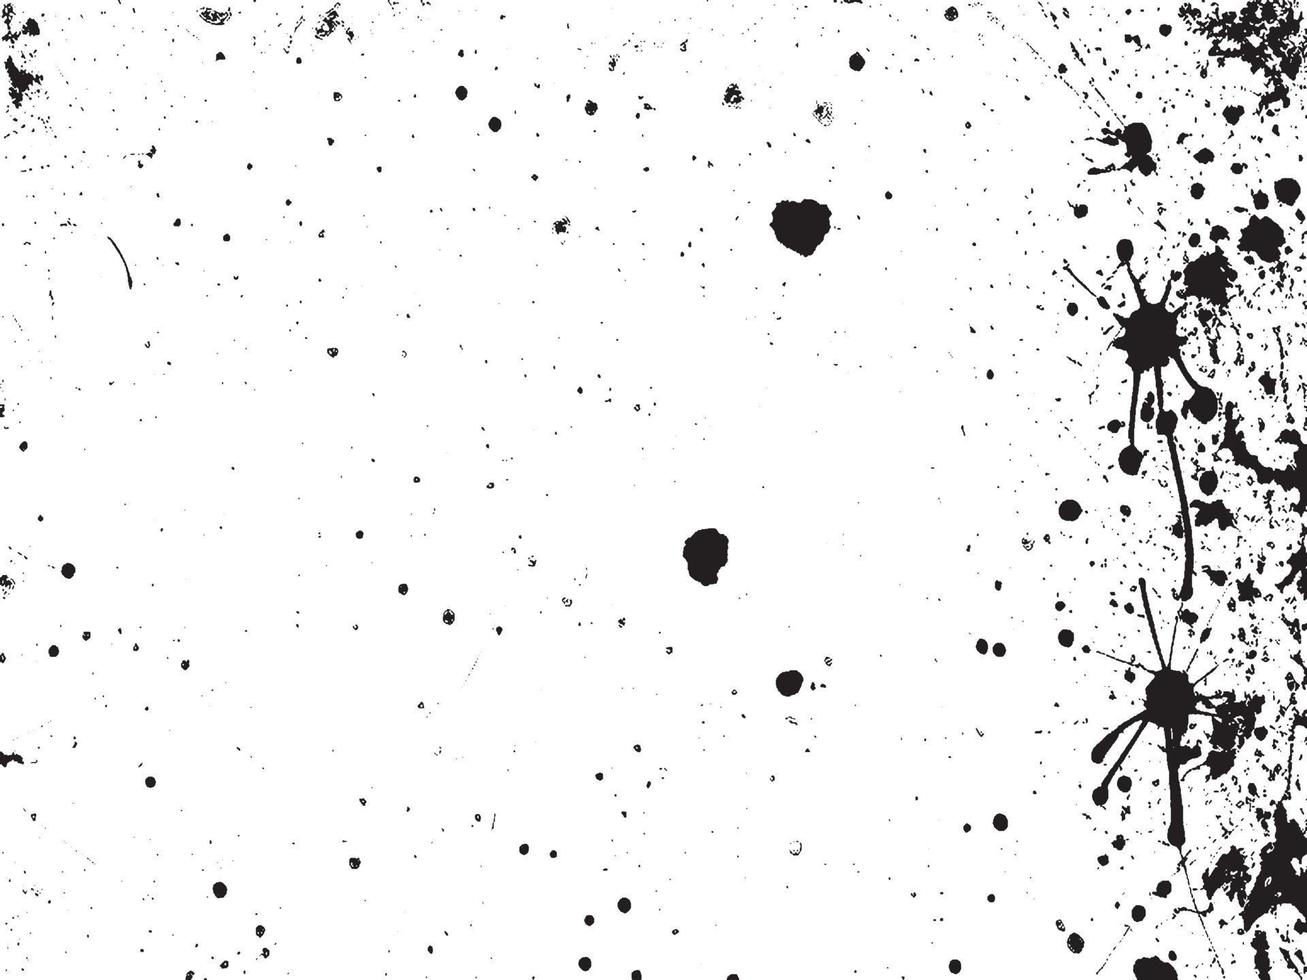 Grunge Black and White Distressed Texture. Vector EPS 10.